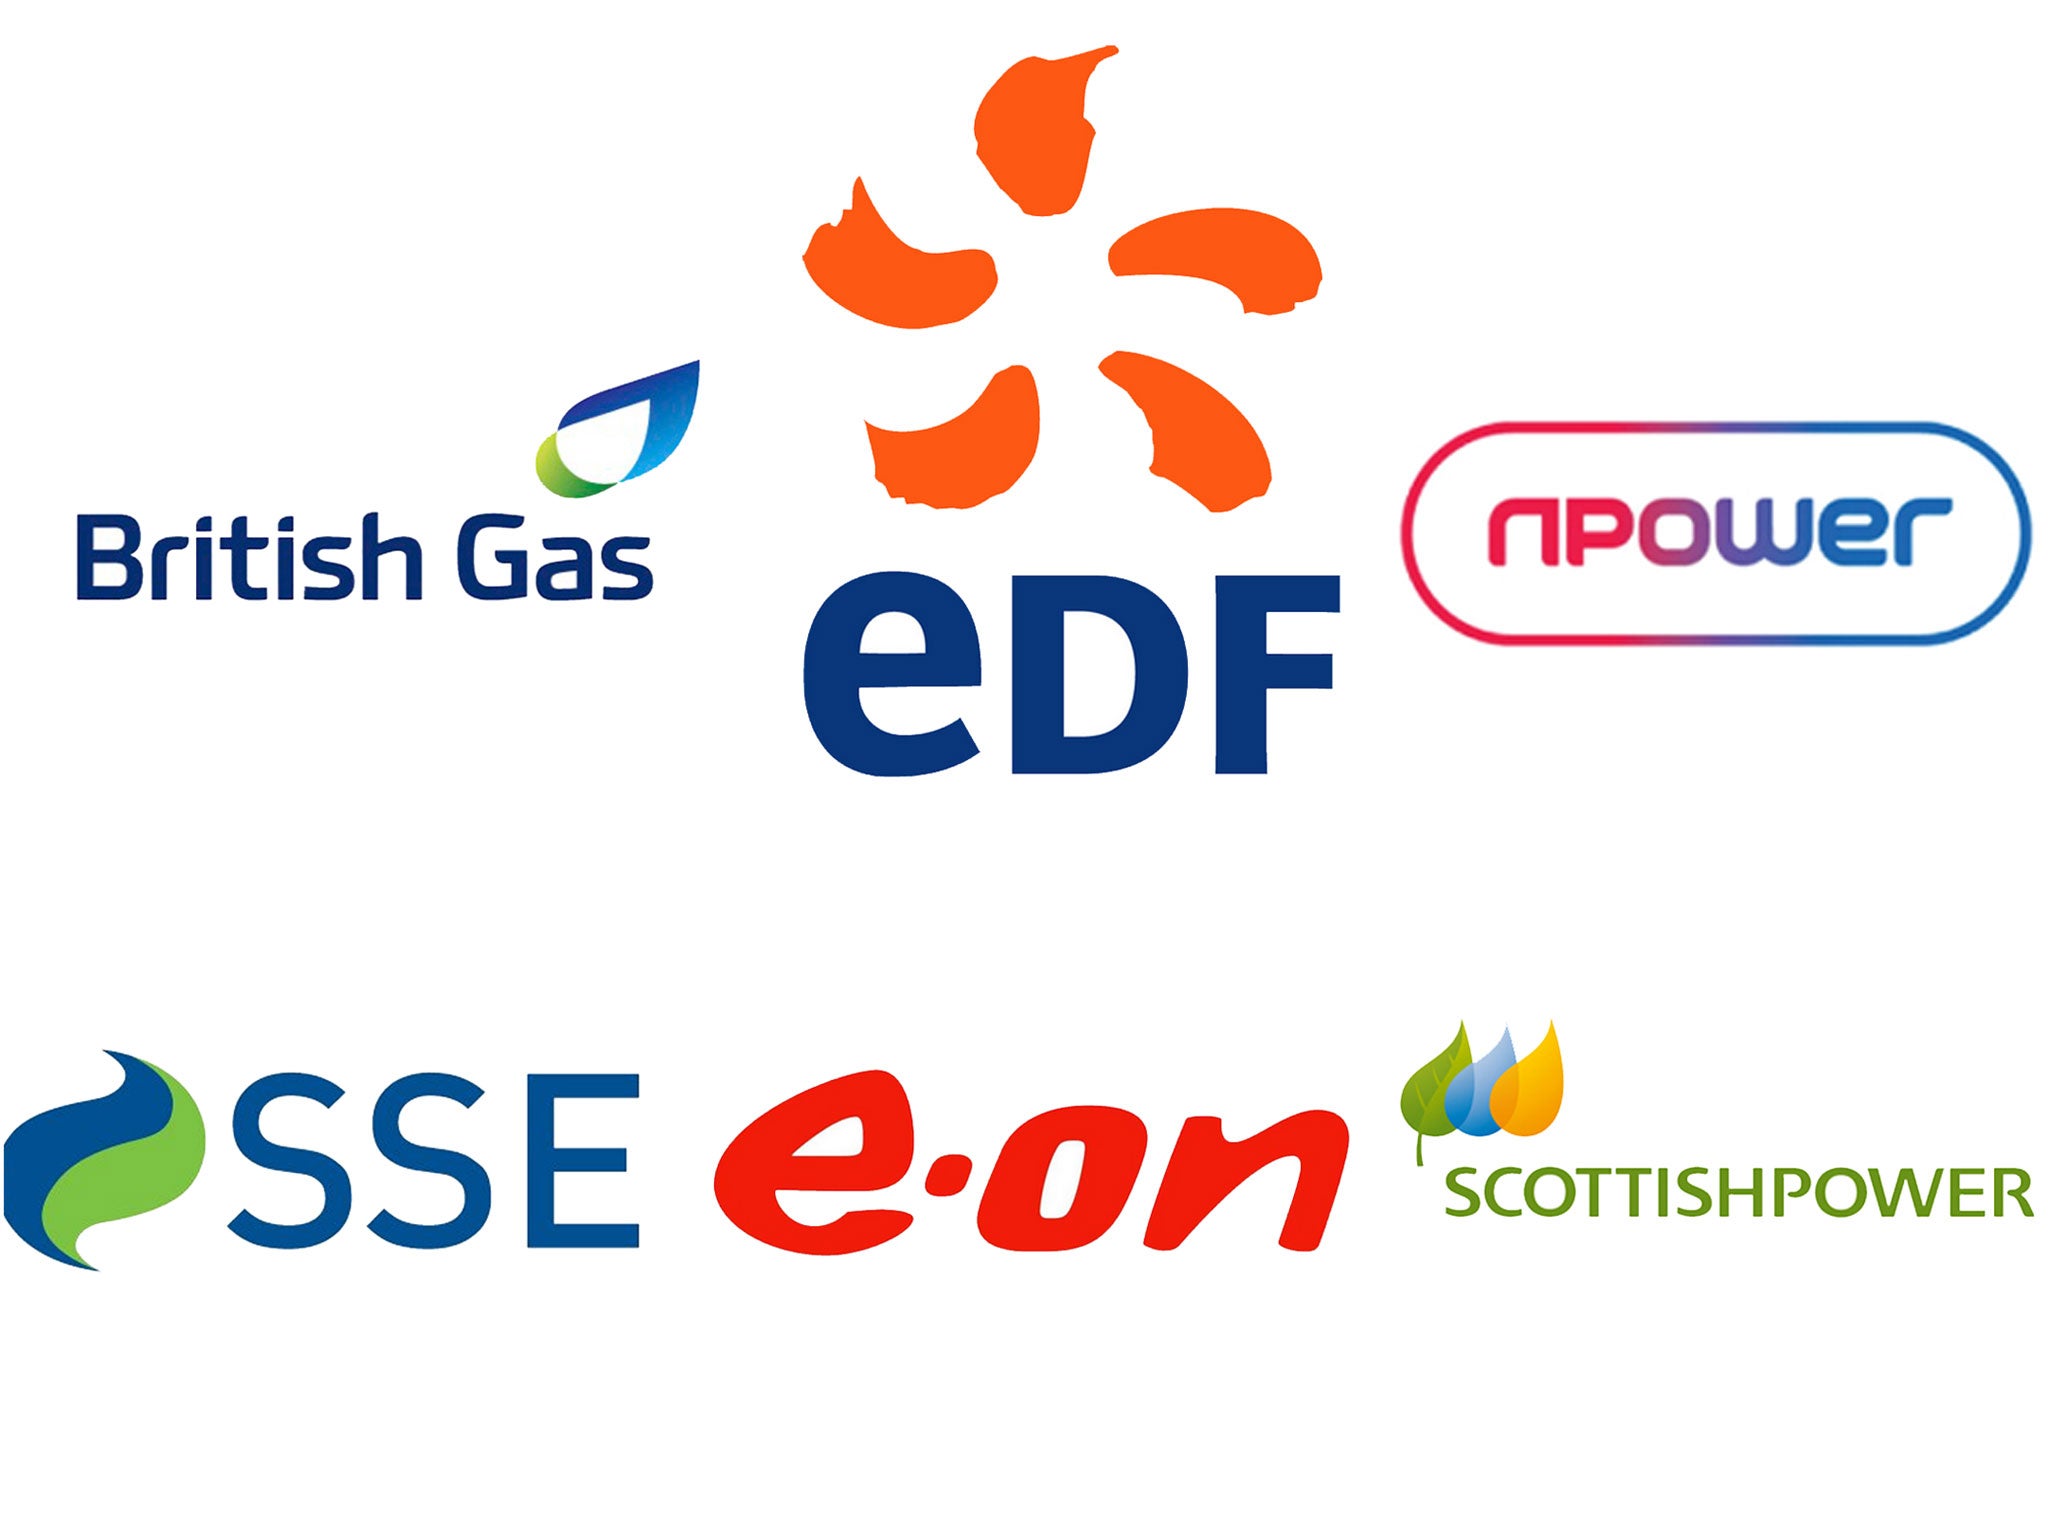 The Big Six energy firms would be slowly re-nationalised under a Jeremy Corbyn government